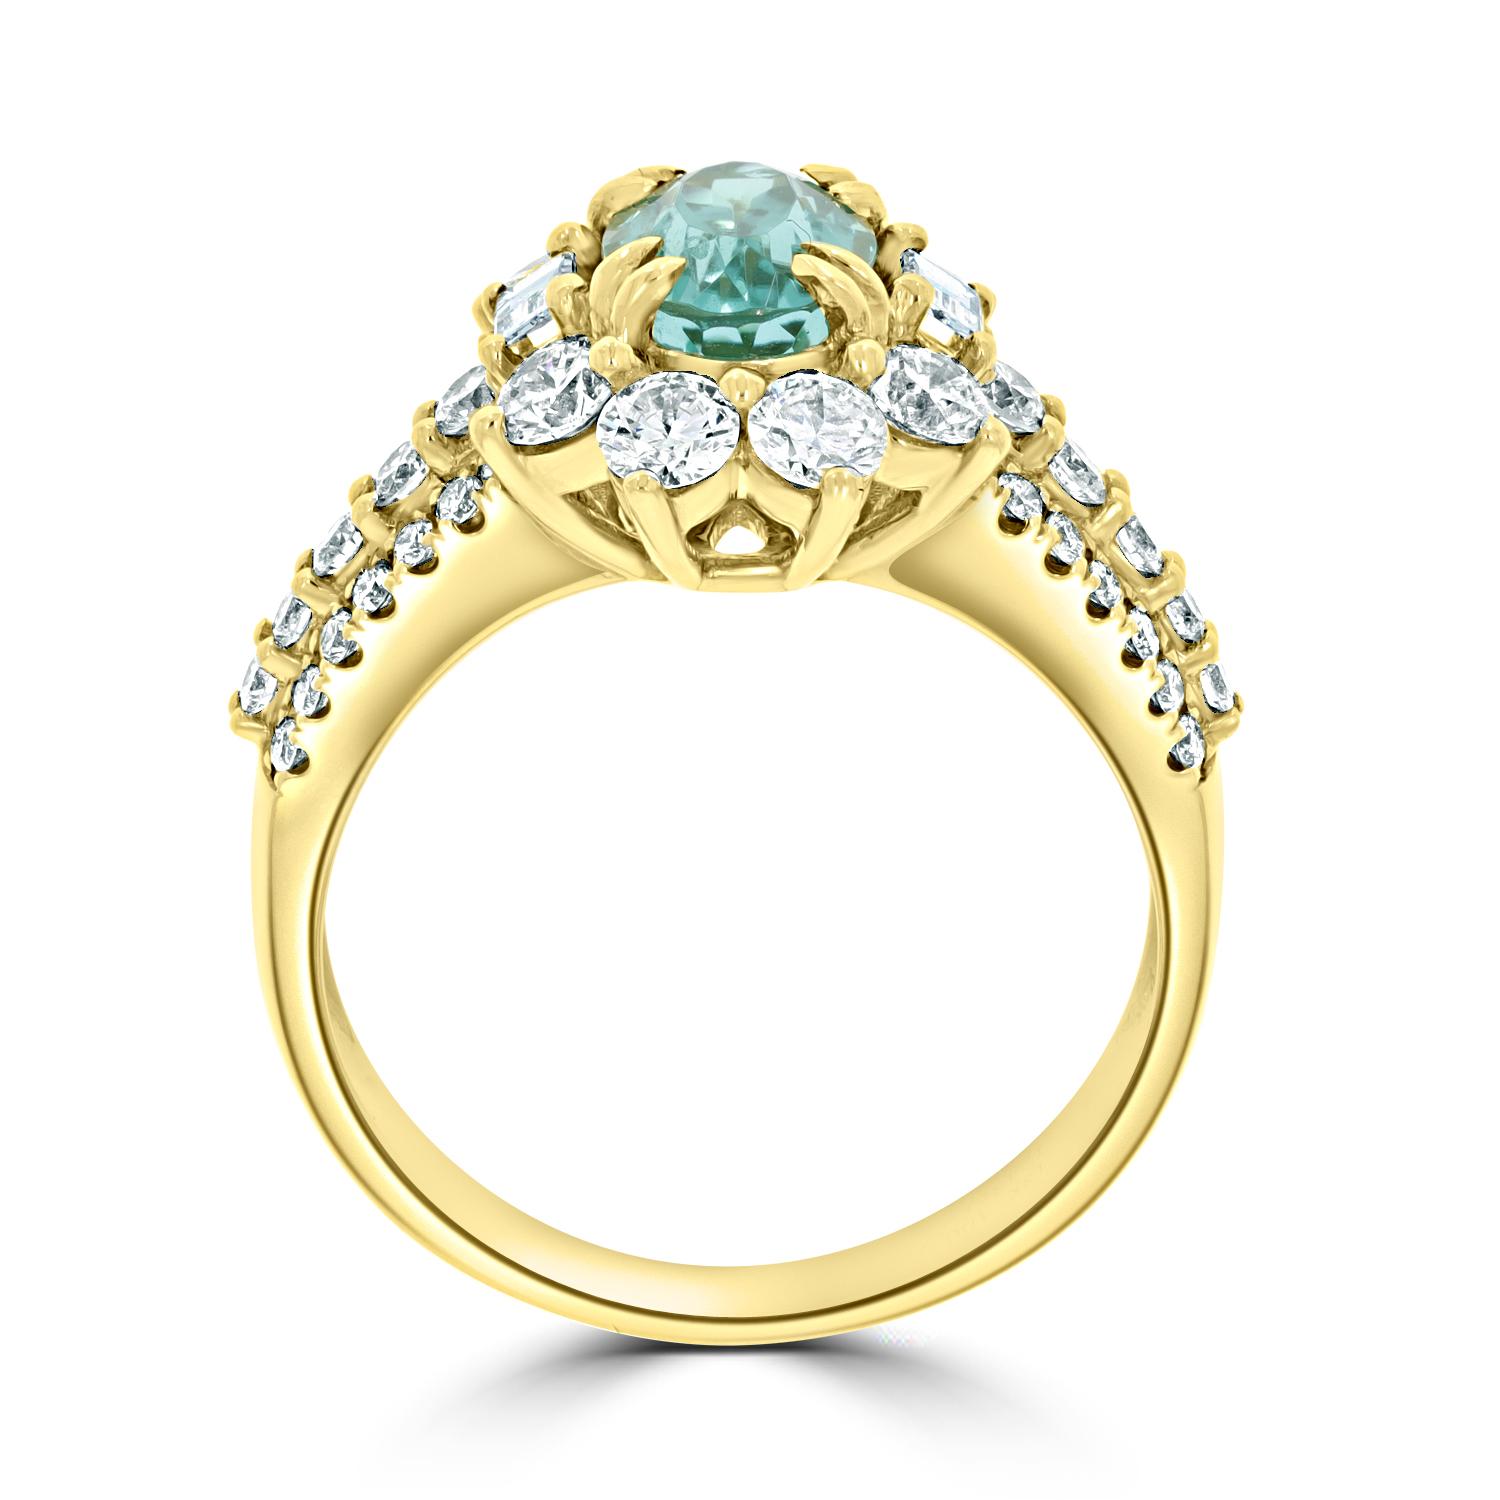 Crafted Of 18k Yellow Gold, The Richness Of This Elegant Ring Is Showcased By Its Endless Glow. Decorated With A Striking Oval Cut Paraiba Which Is Bordered By Charming Round Cut Diamonds, This Exquisite Jewelry Spreads A Glorious Shine That Is Hard